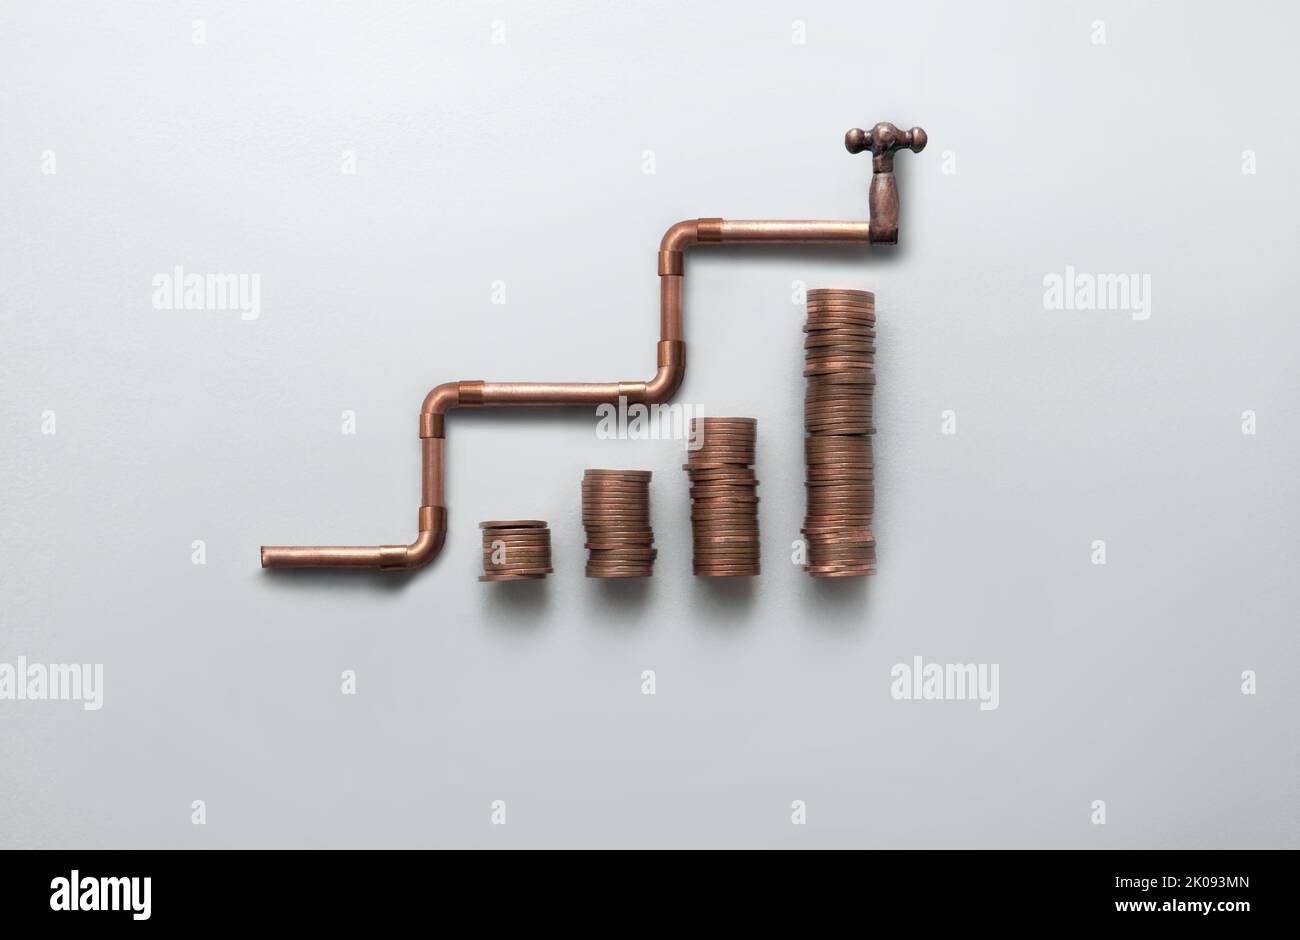 Copper piping with tap rising upwards alongside stacks of coins, increase in energy bills, costs and prices concept Stock Photo